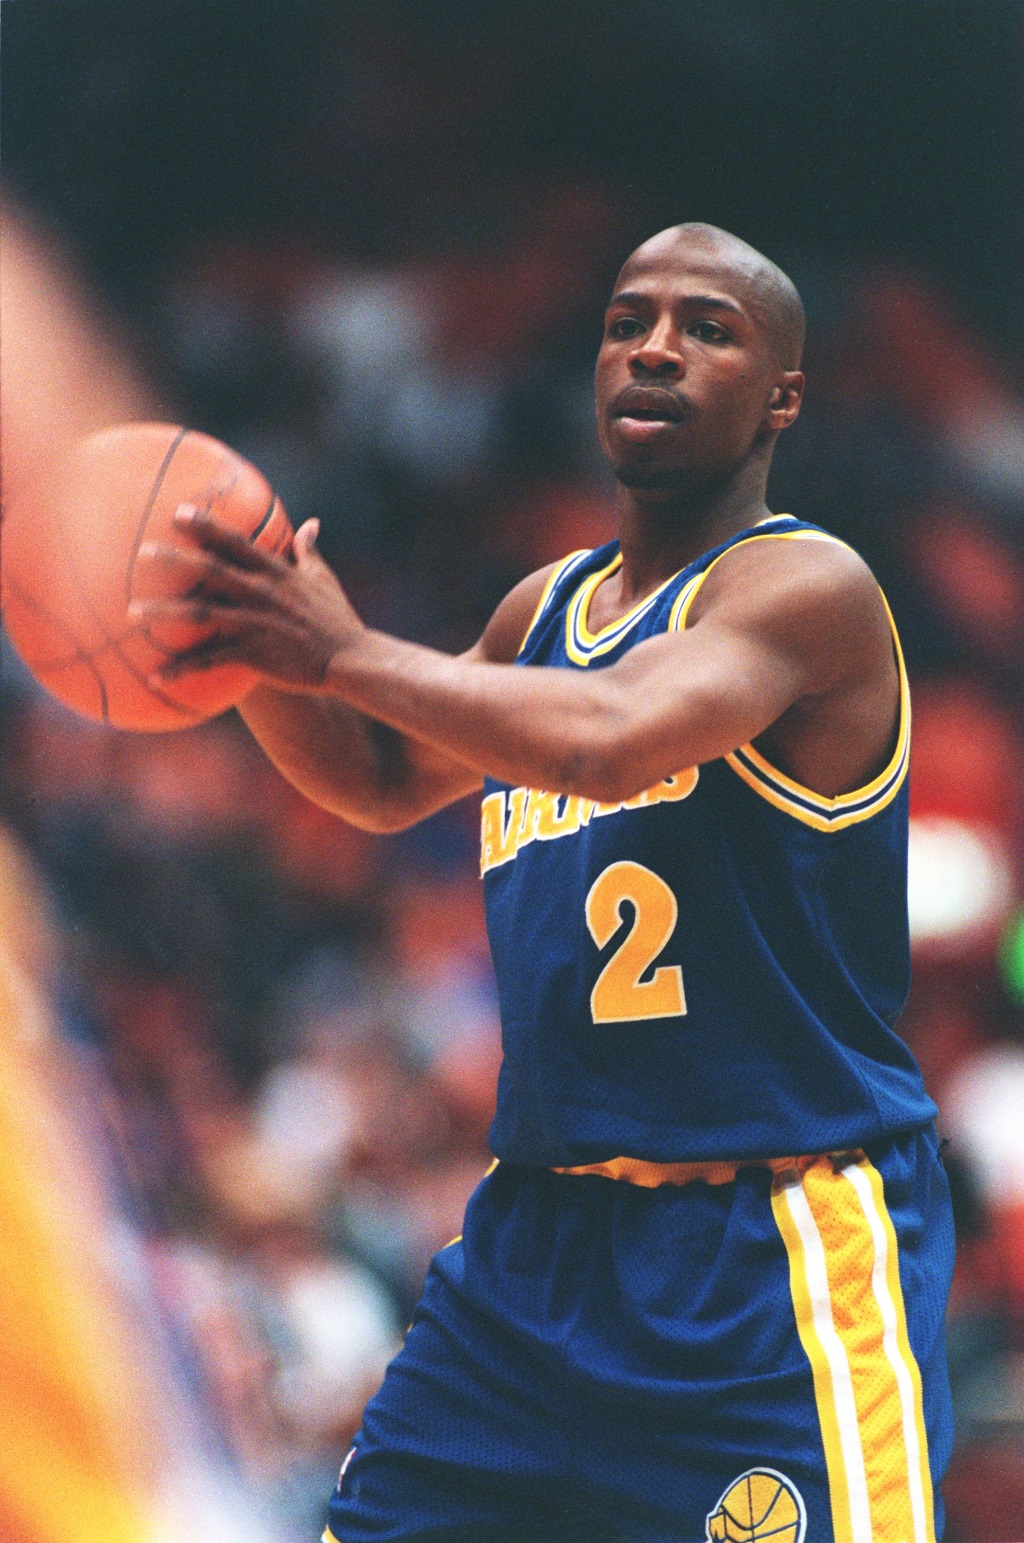 12 Dec 1993: KEITH JENNINGS OF THE GOLDEN STATE WARRIORS LOOKS TO PASS DURING THE 100-97 WIN OVER THE LOS ANGELES LAKERS AT THE GREAT WESTERN FORUM IN LOS ANGELES, CALIFORNIA.